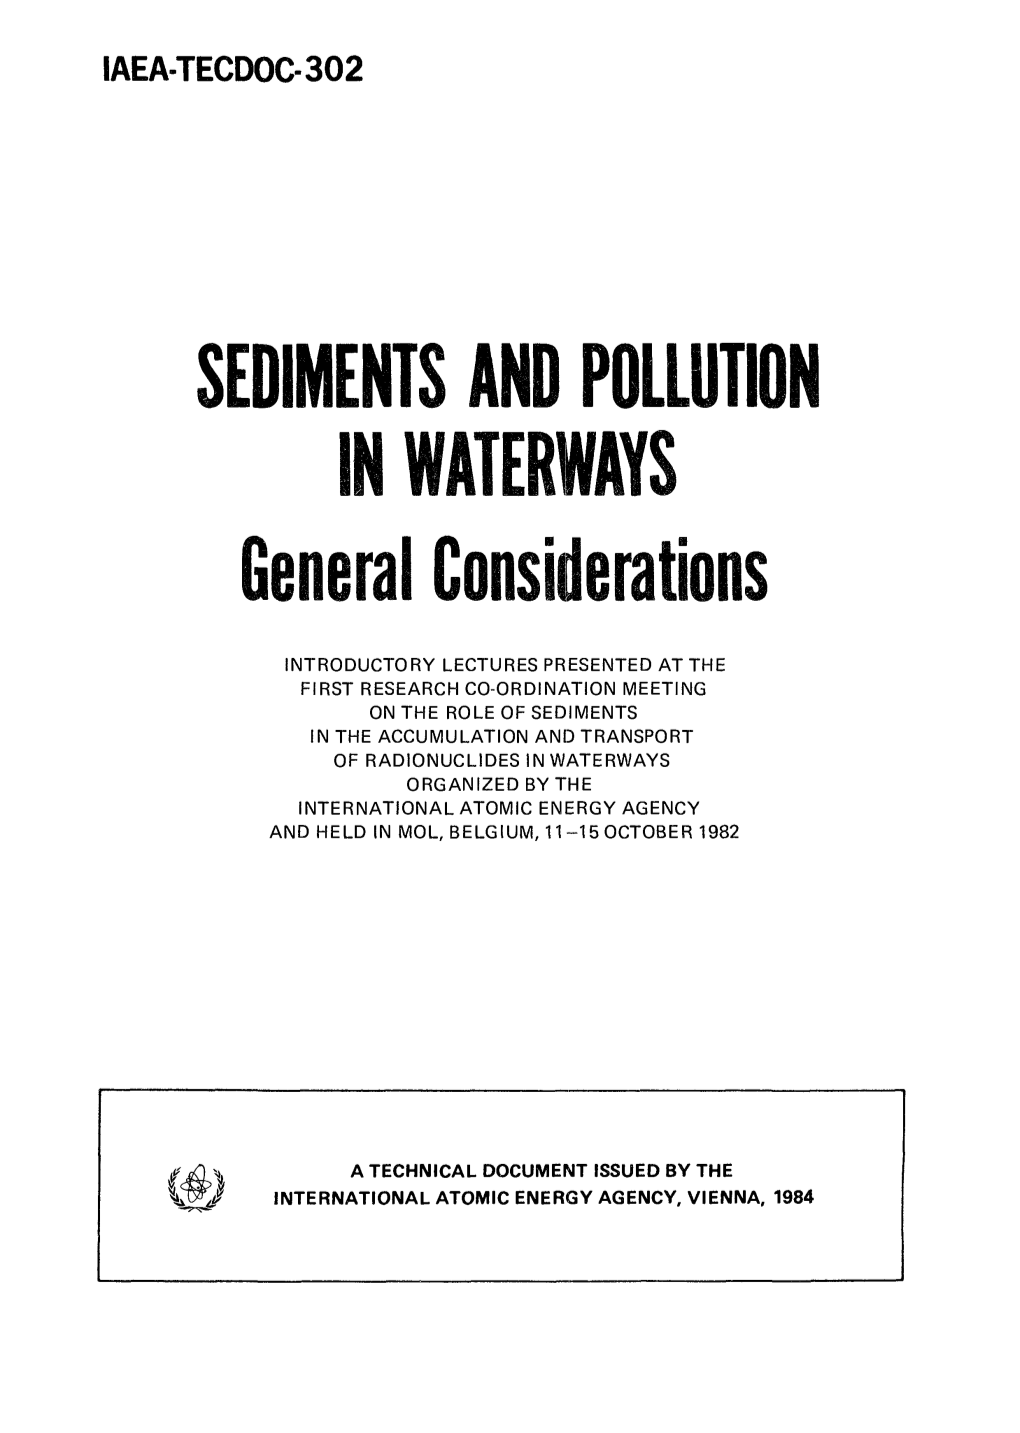 SEDIMENTS and POLLUTION in WATERWAYS General Considerations